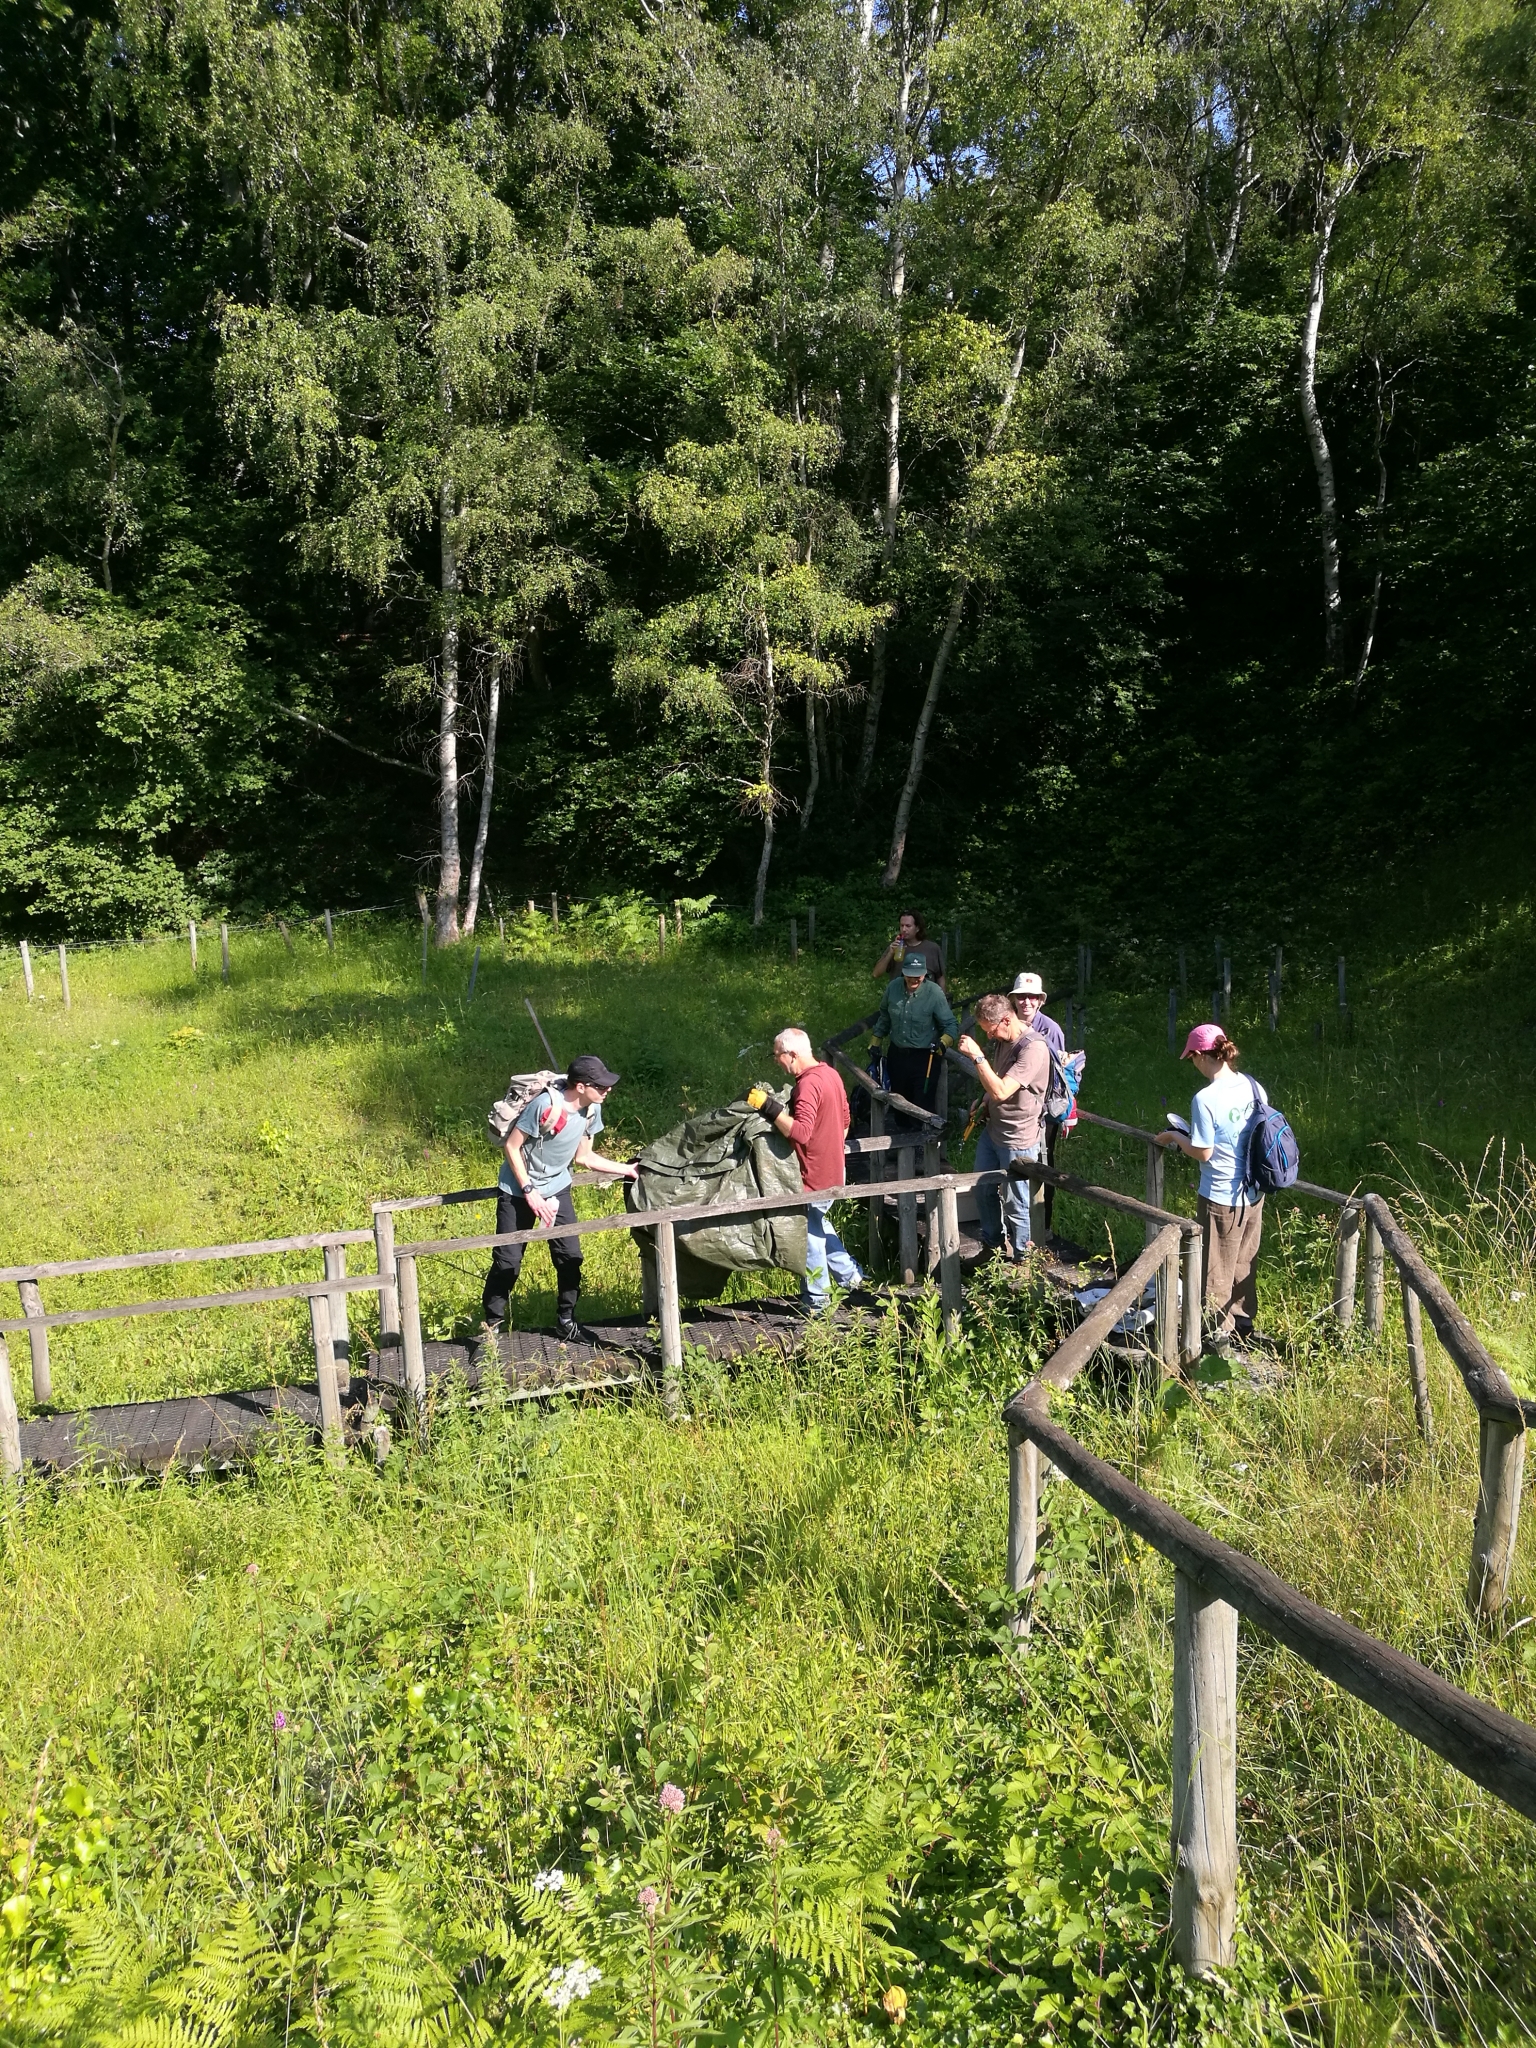 A photo from the FoTF Conservation Event - July 2021 - Maintenance tasks at Rex Graham Reserve : Volunteers descend into the reserve using the walkway carrying tools